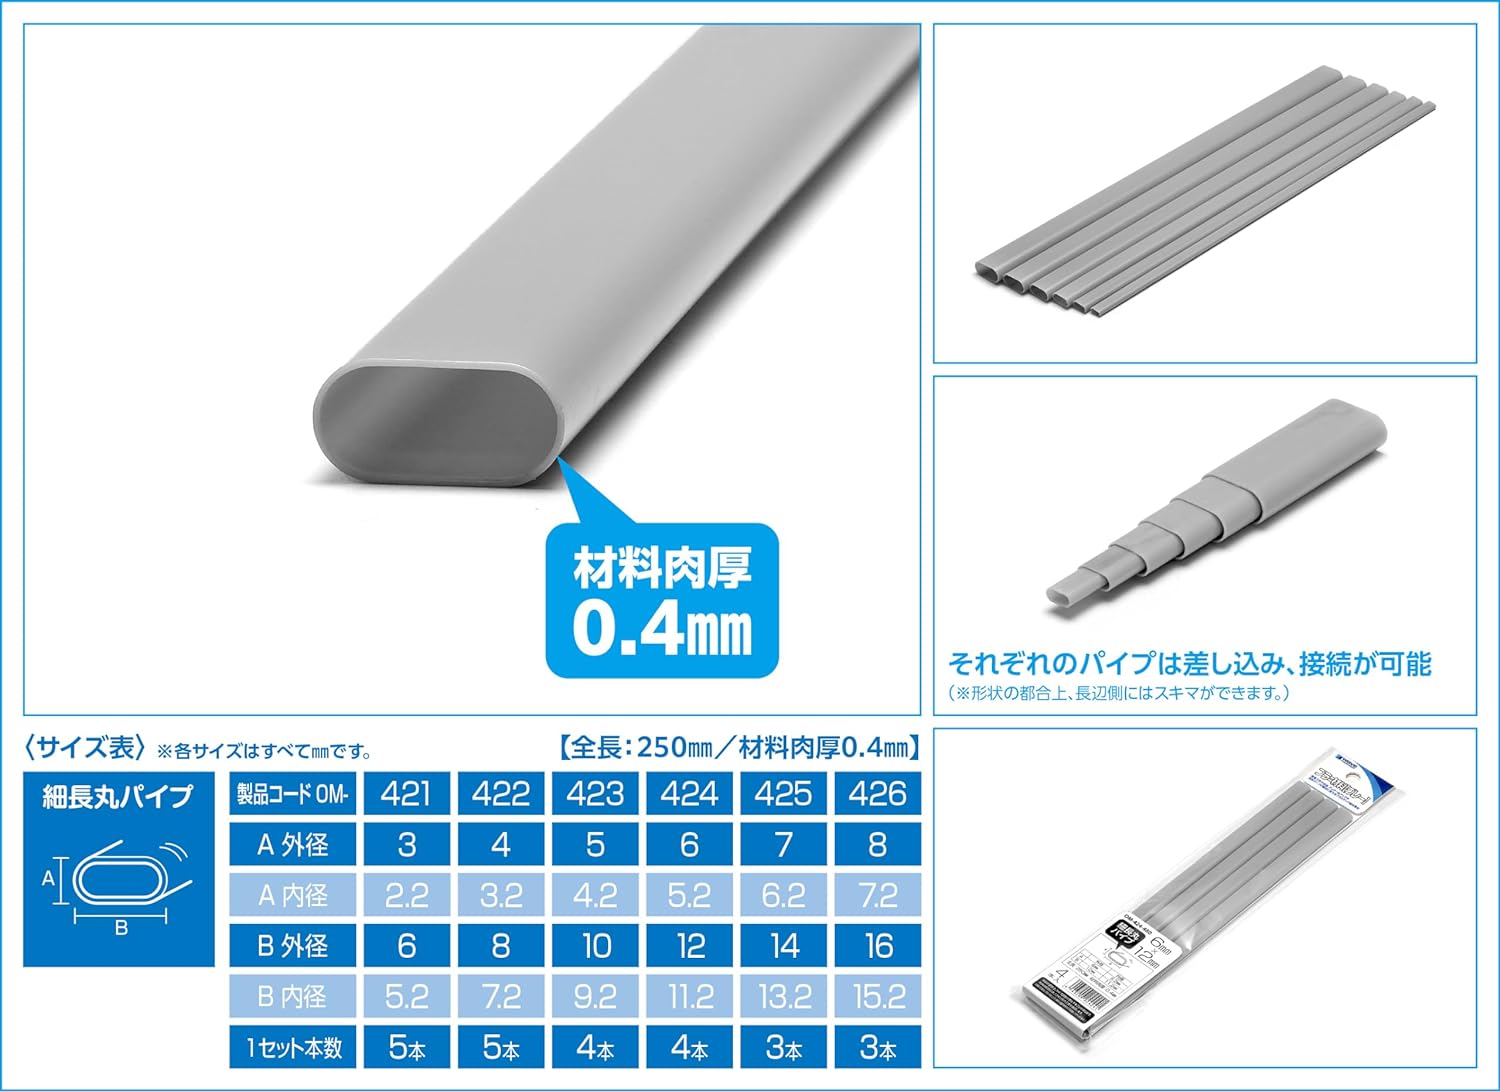 Wave OM-421 Plastic Material, Gray, Elongated Round Pipe, 0.1 x 0.2 inches (3 x 6 mm), 5 Pieces Material Series - BanzaiHobby